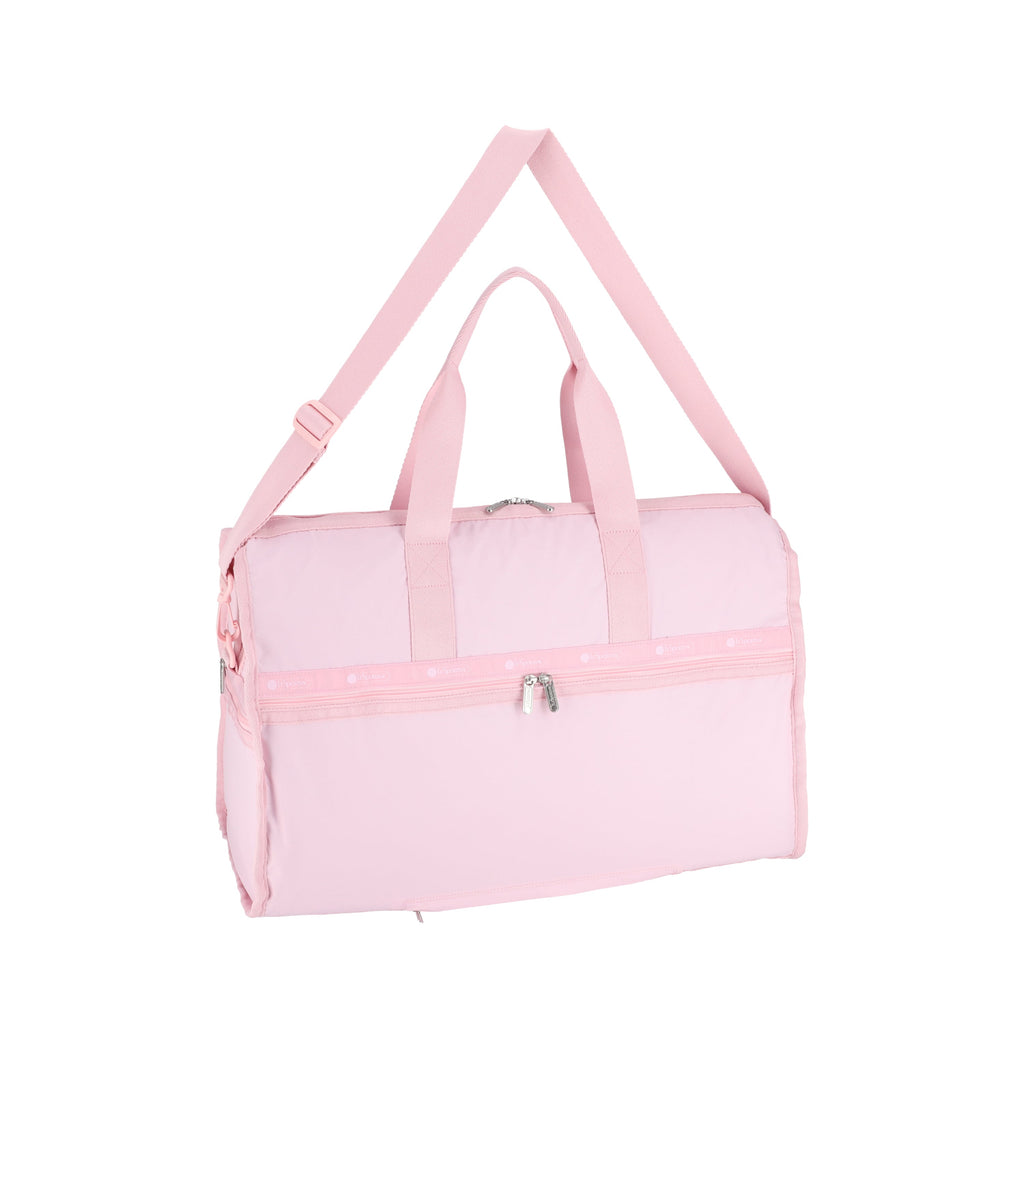 Deluxe Large Weekender - Powder Pink solid – LeSportsac